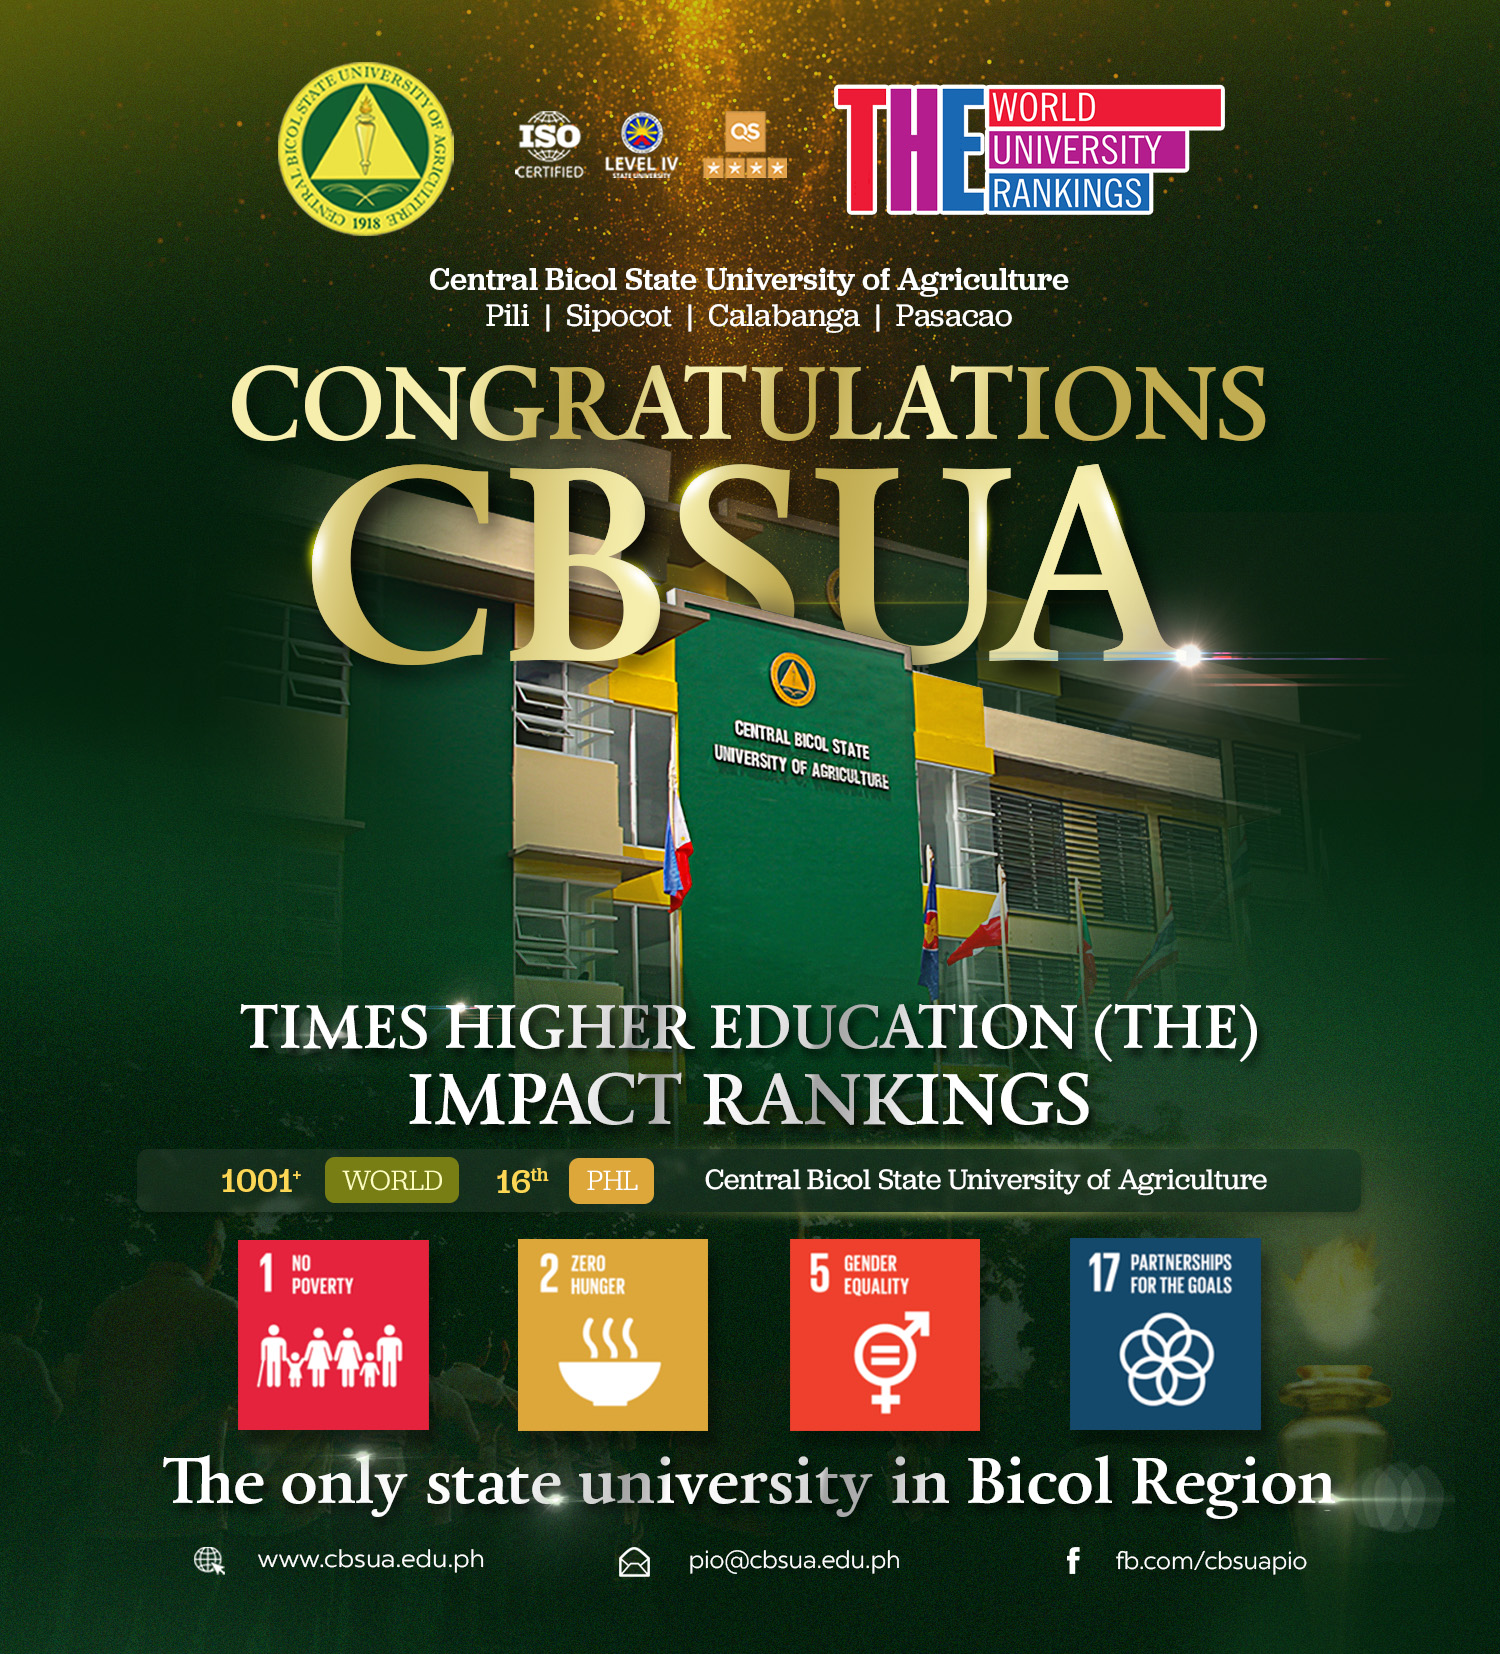 CBSUA LEADS THE WAY AS THE ONLY STATE UNIVERSITY IN BICOL REGION, RANKS 16TH IN THE PHILIPPINES TO QUALIFY FOR TIMES HIGHER EDUCATION (THE) IMPACT RANKINGS